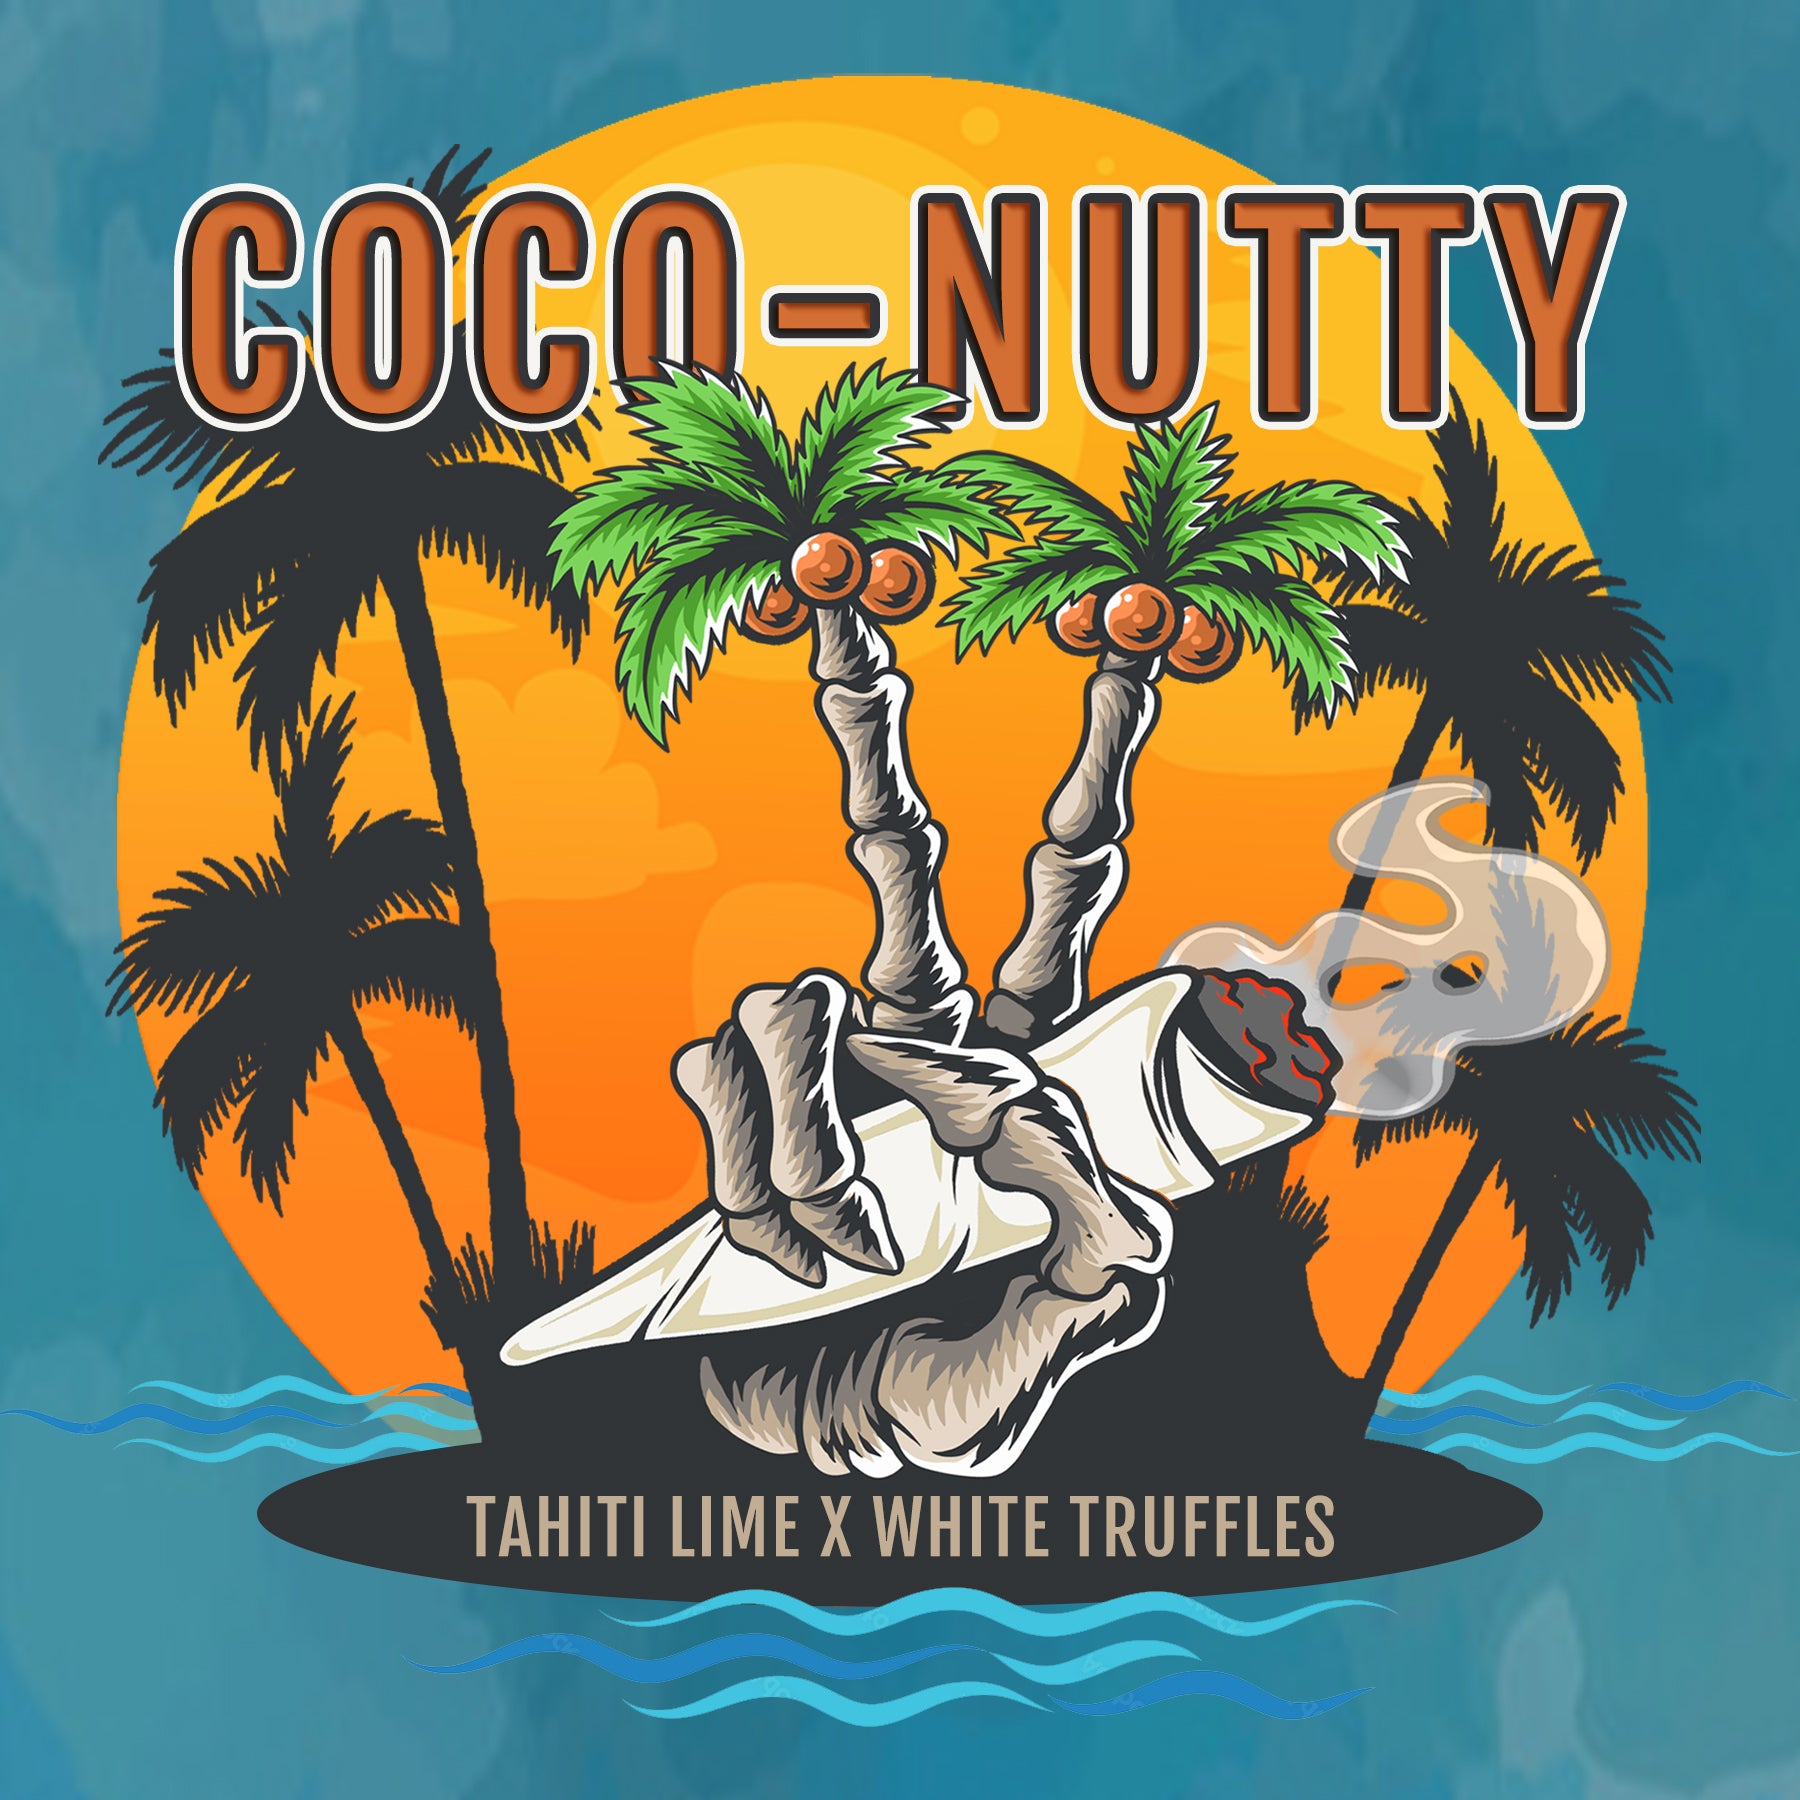 Coco-nutty